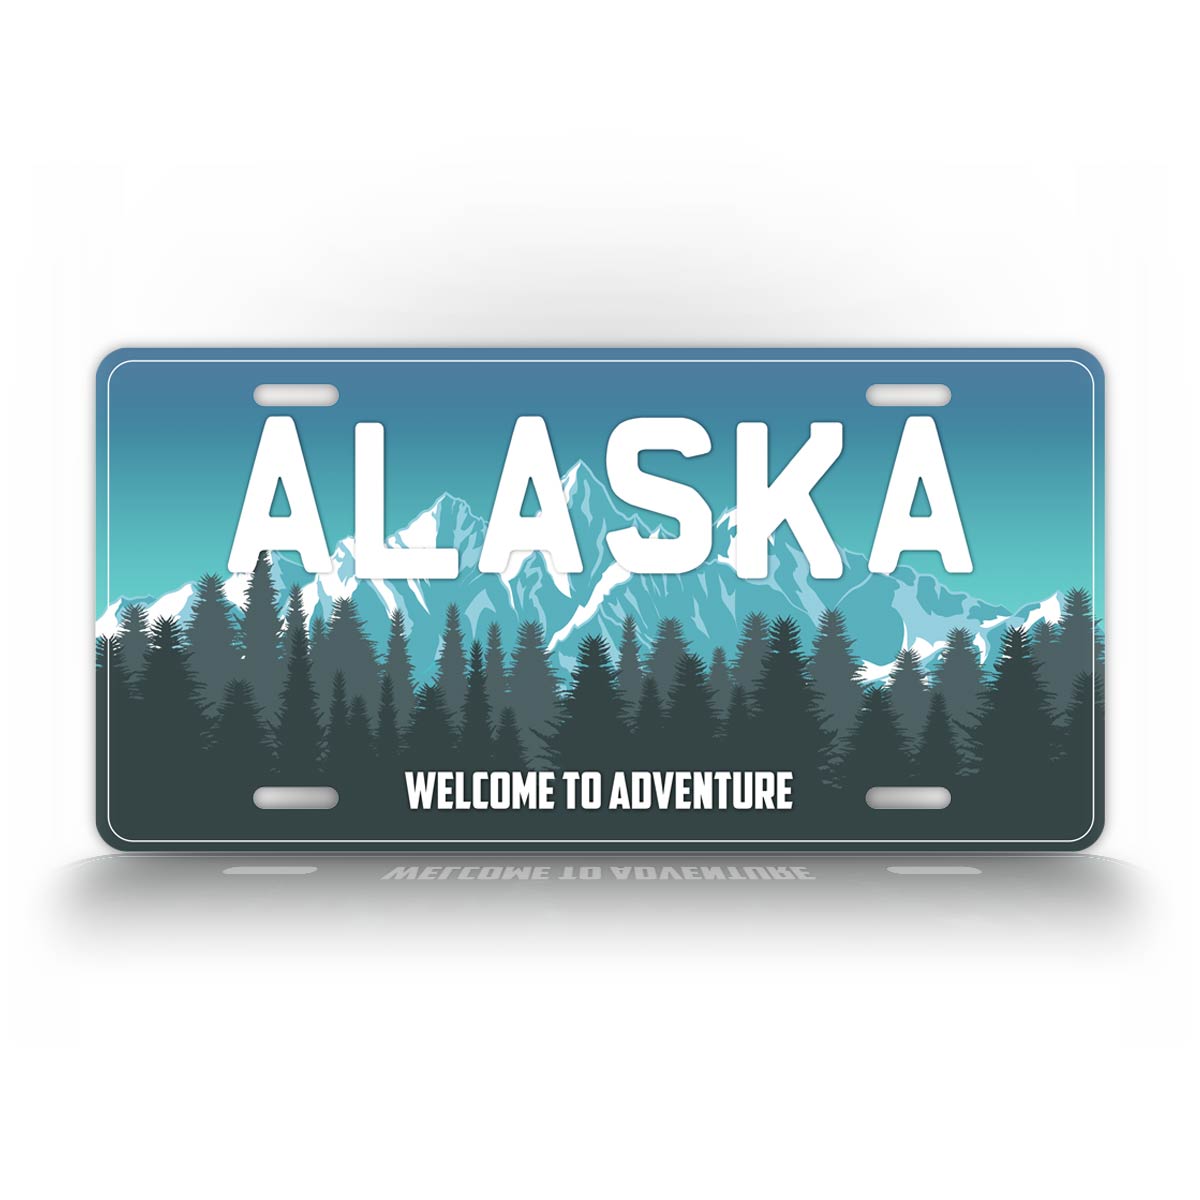 Alaska Welcome To Adventure License Plate